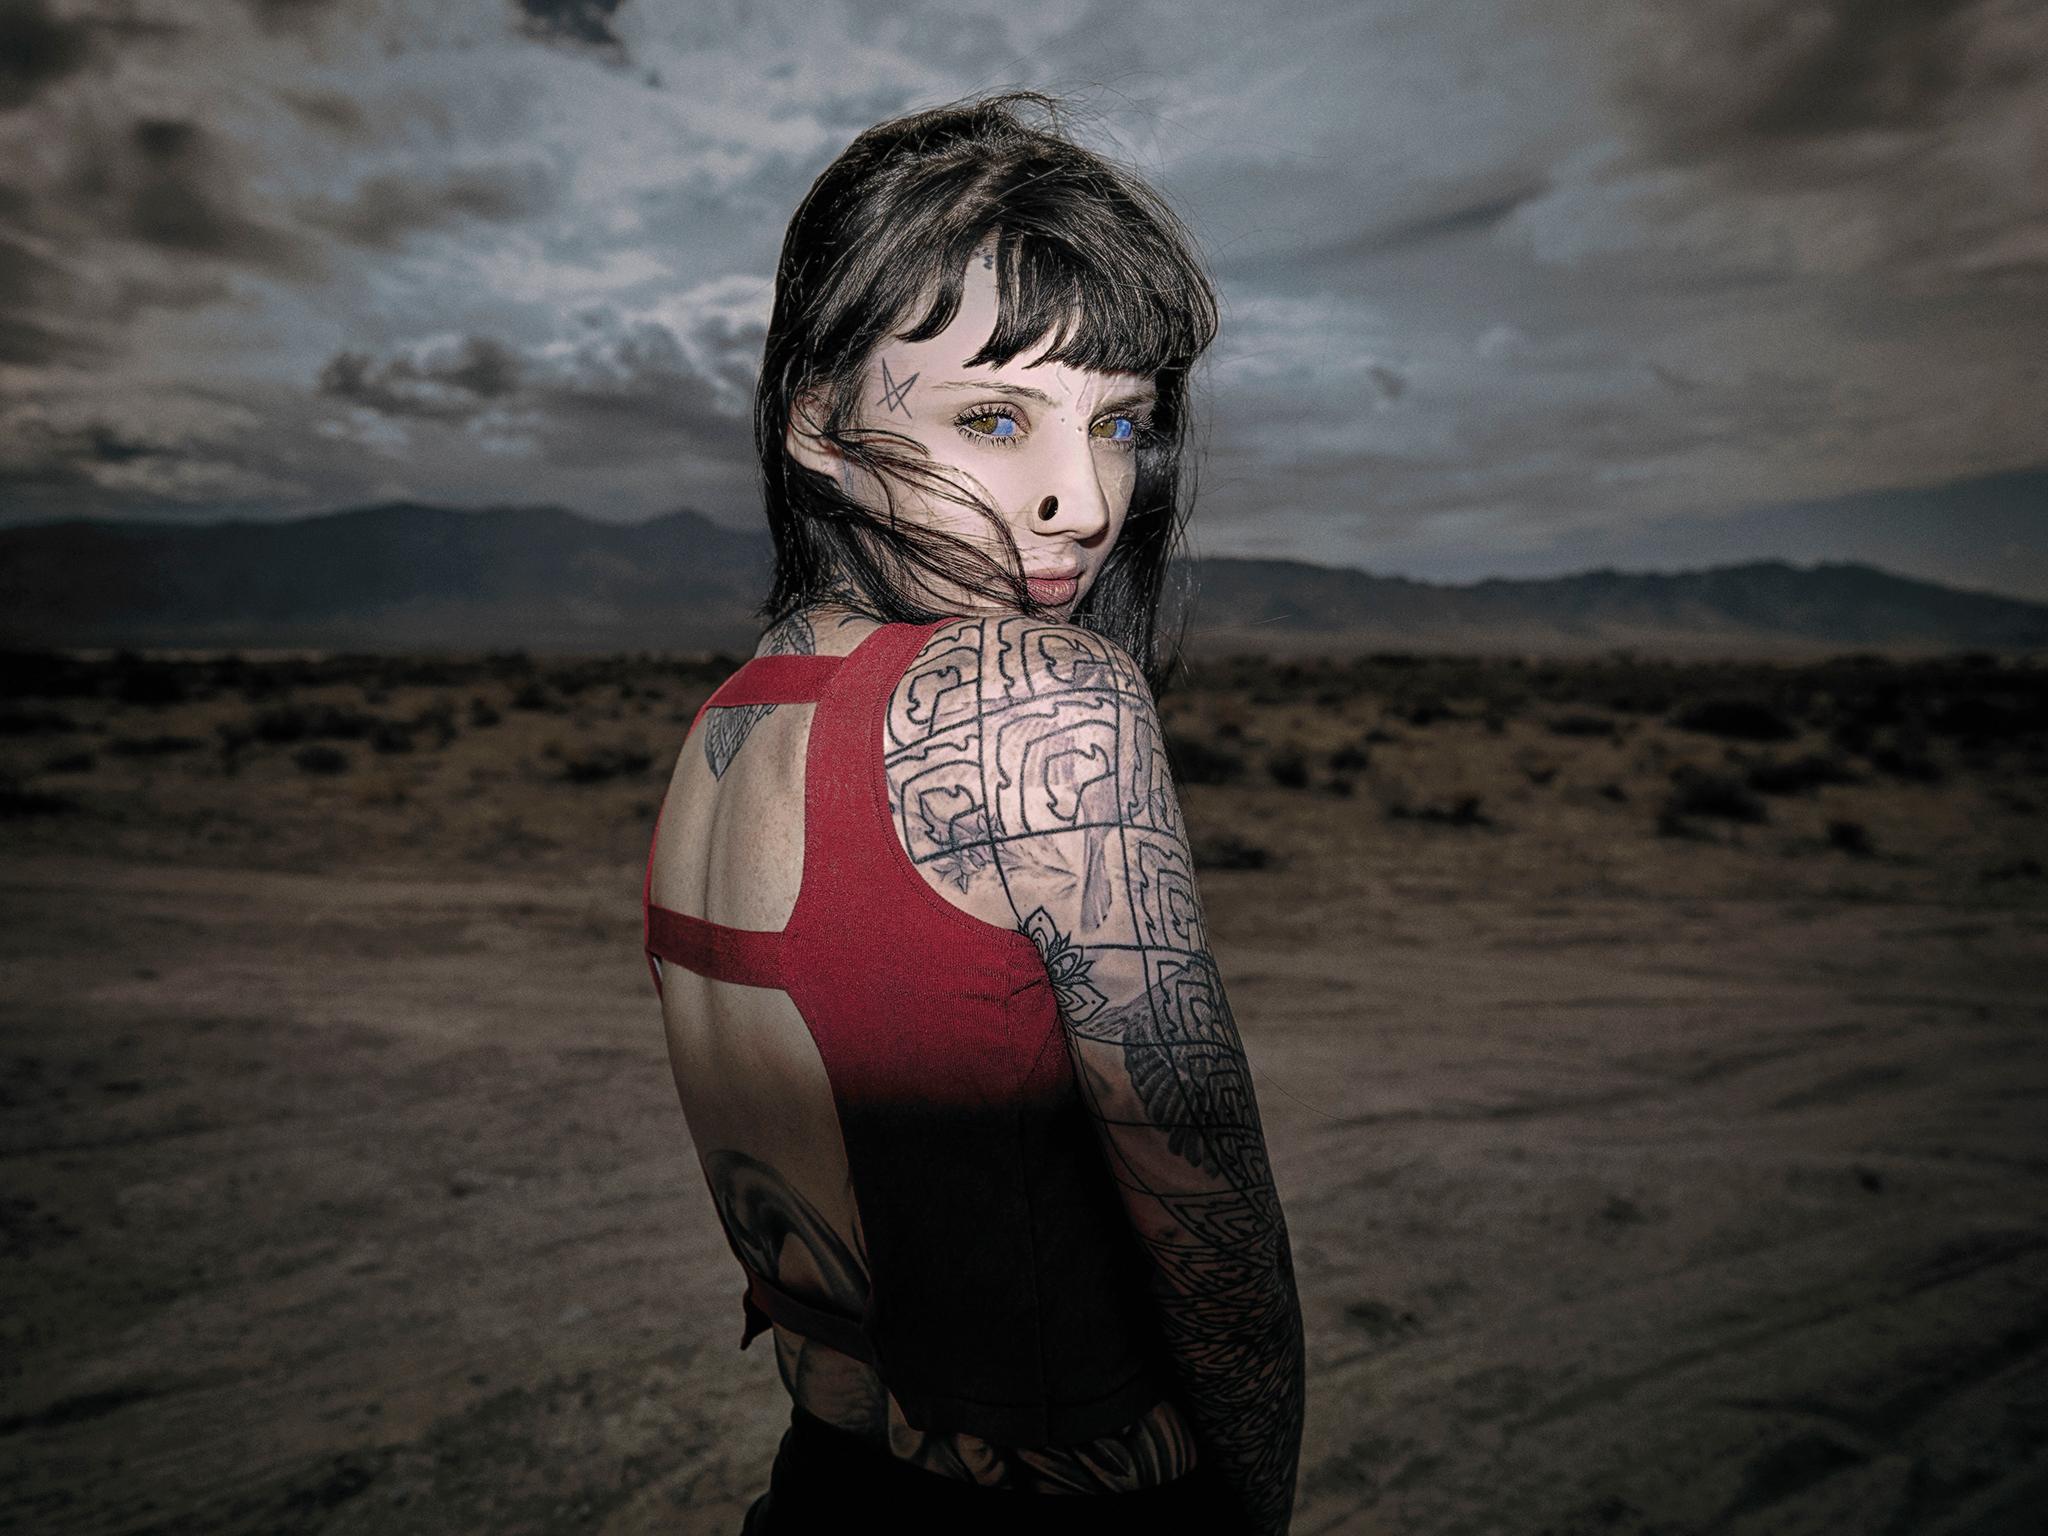 Grace Neutral appears in a new documentary about body art